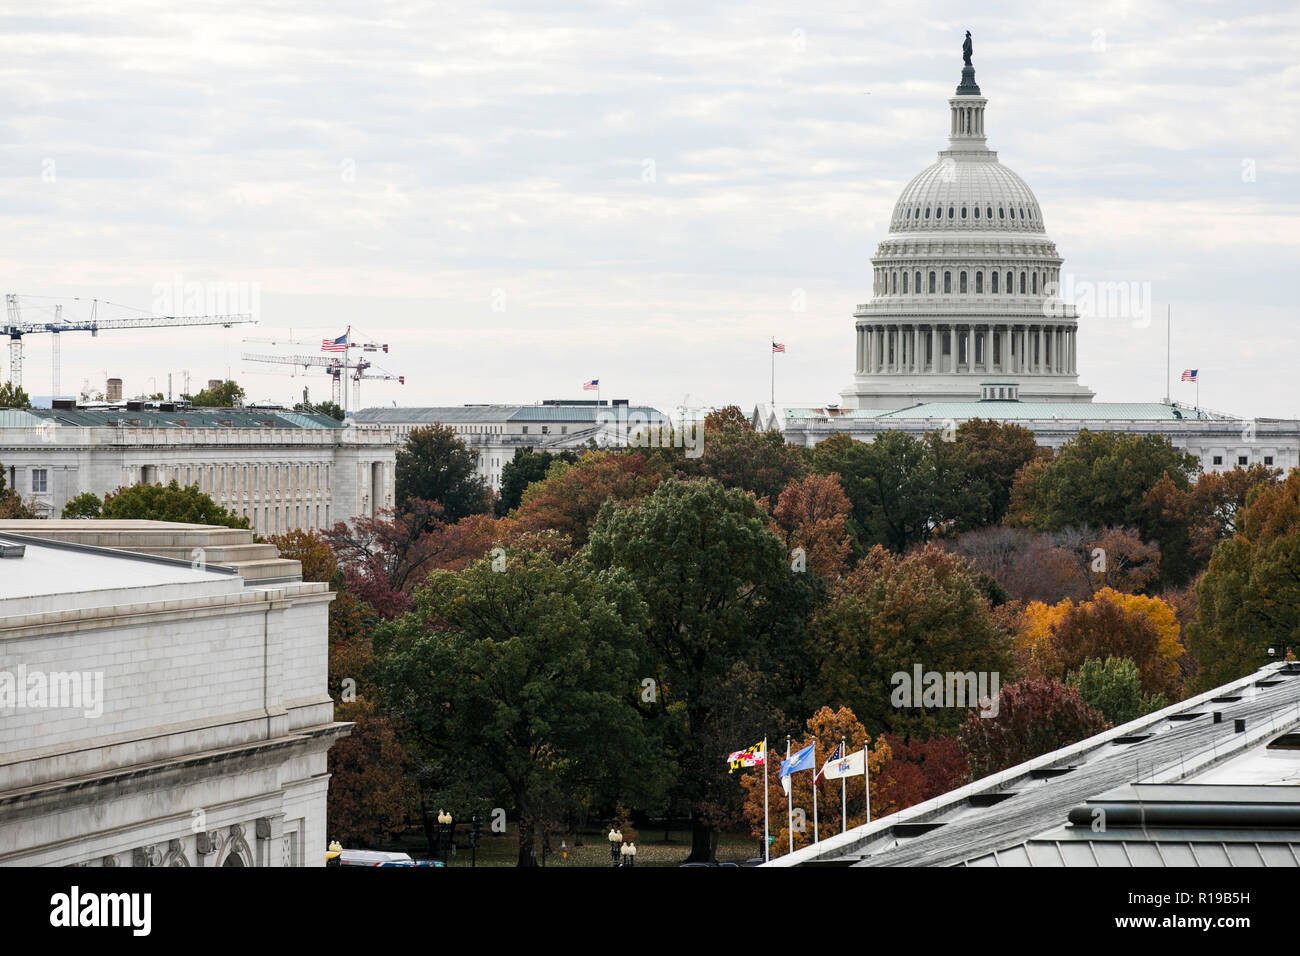 A view of the The United States Capitol Building in Washington, D.C. on November 7, 2018. Stock Photo